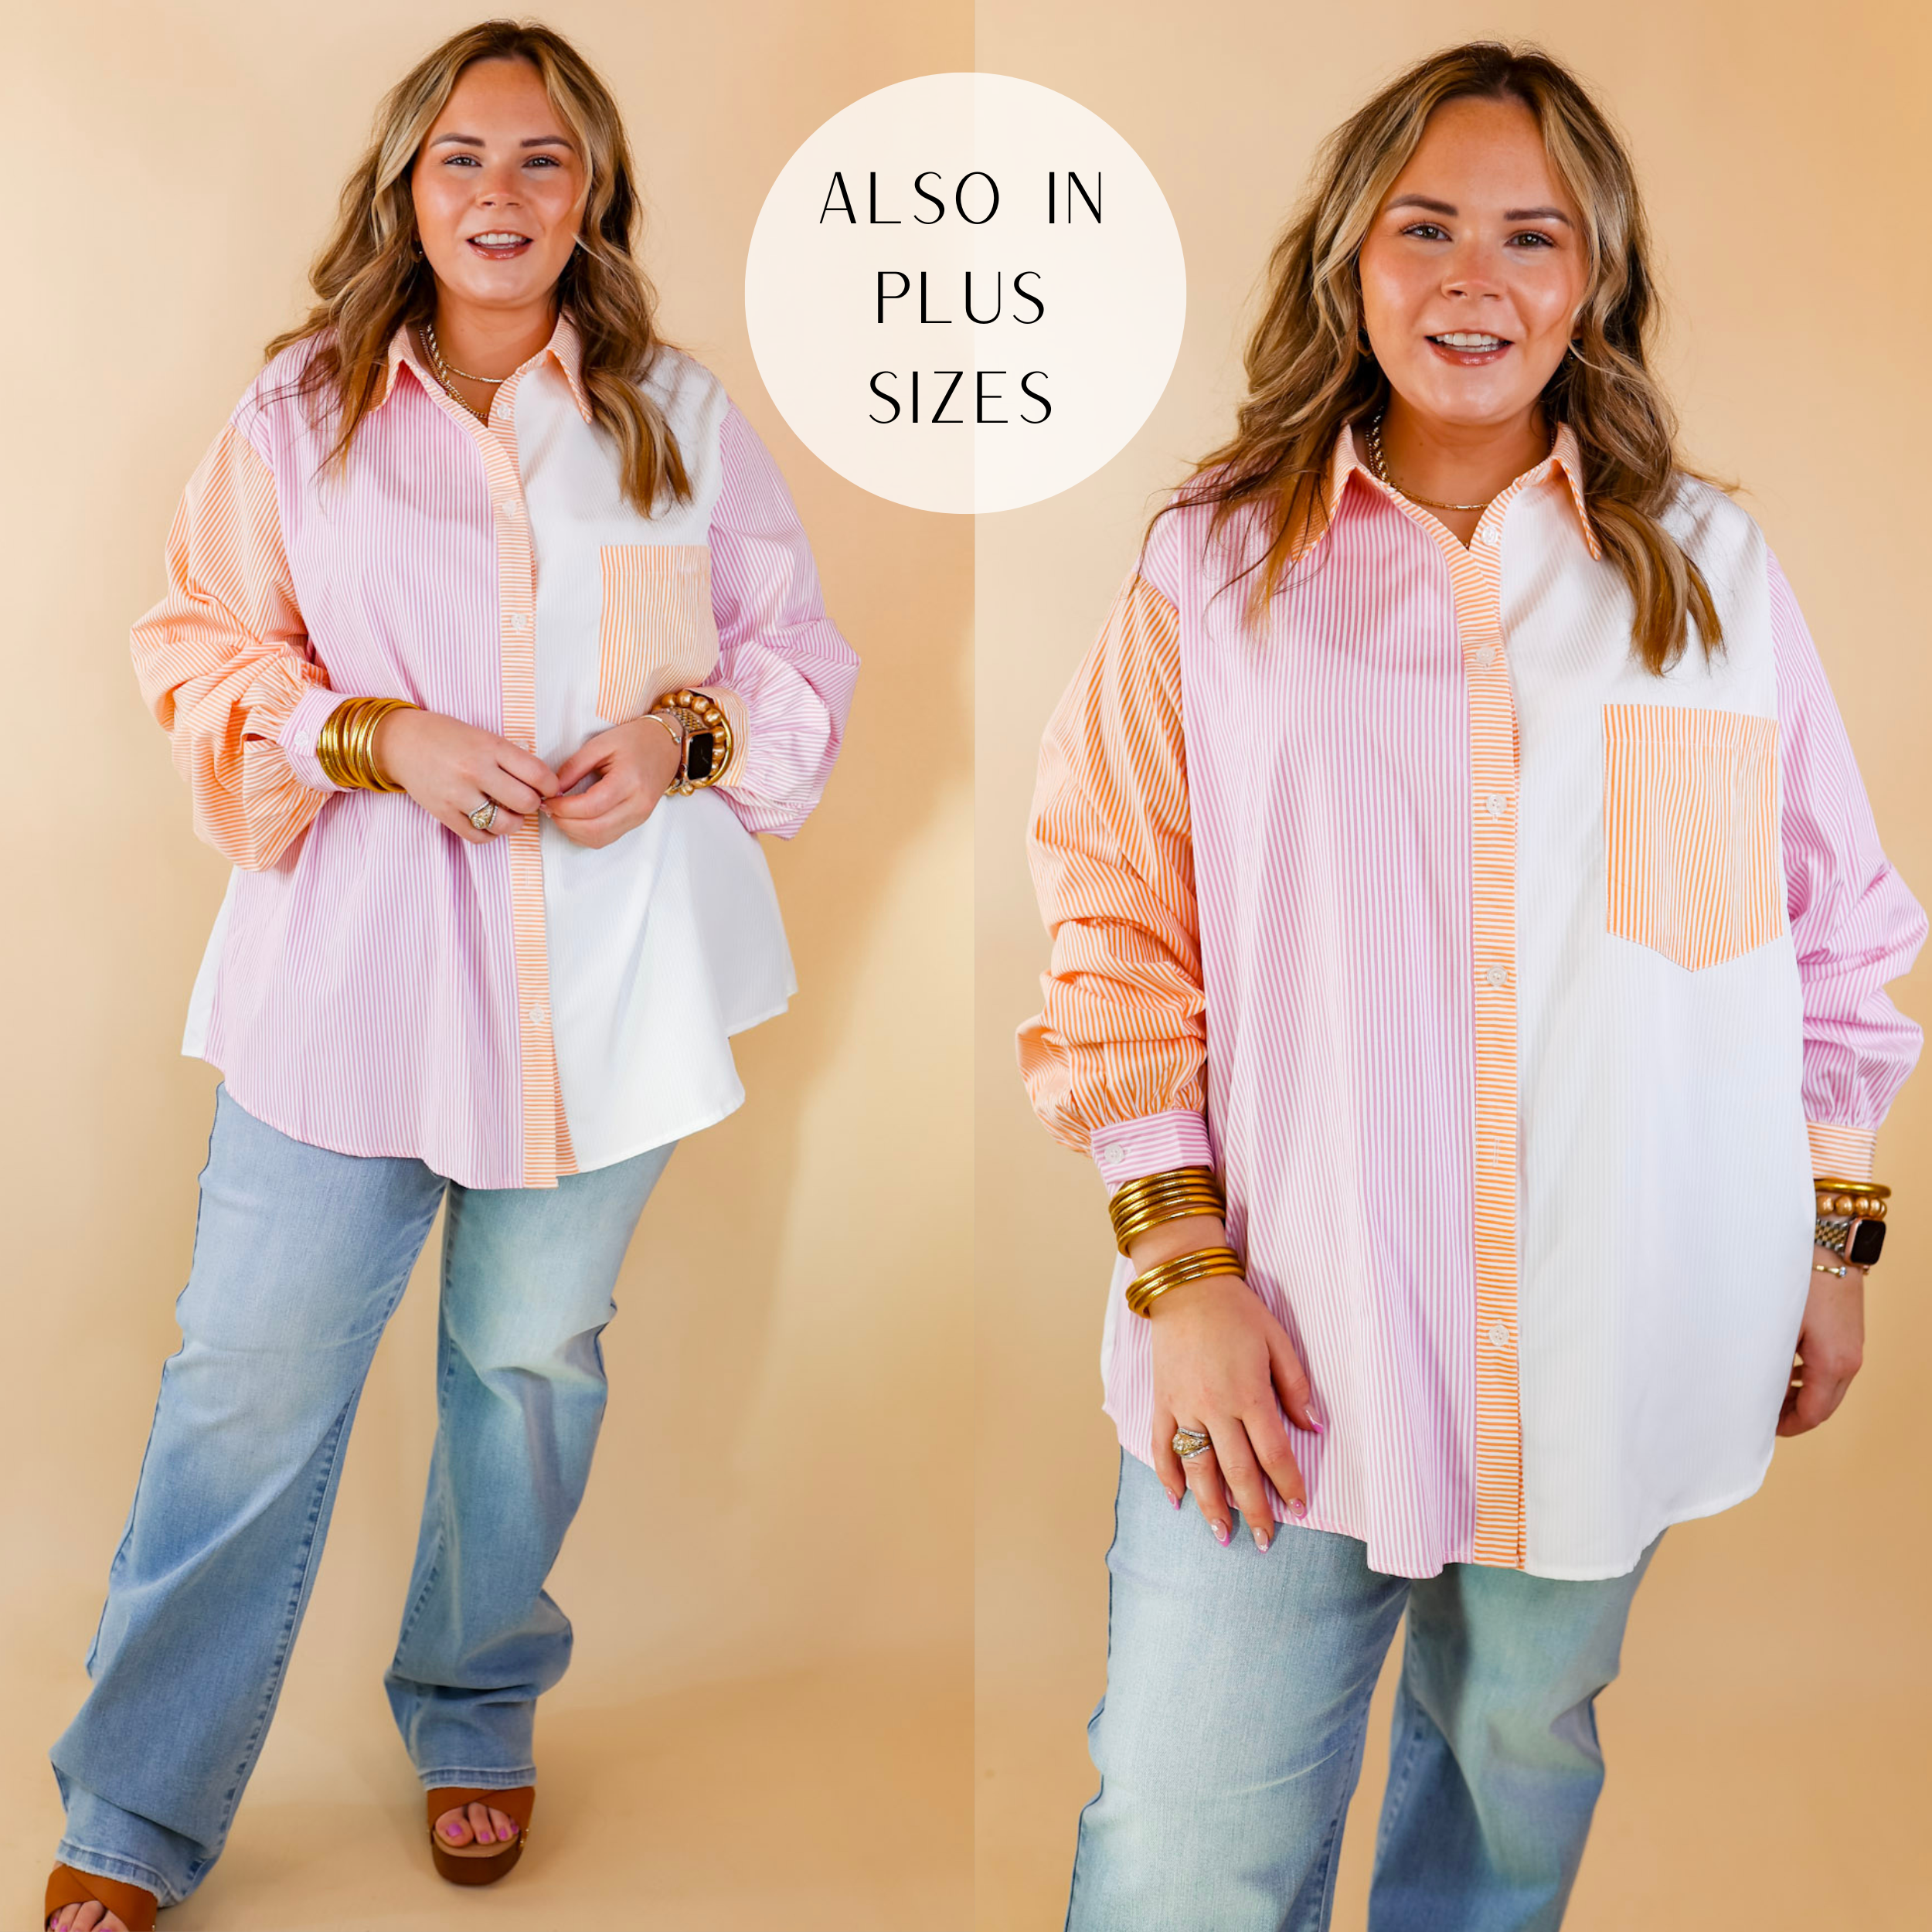 Model is wearing a pin stripe button up top with a color block pattern of white, pink, and orange. Model has it paired with light wash, wide leg jeans, tan wedges, and gold jewelry.